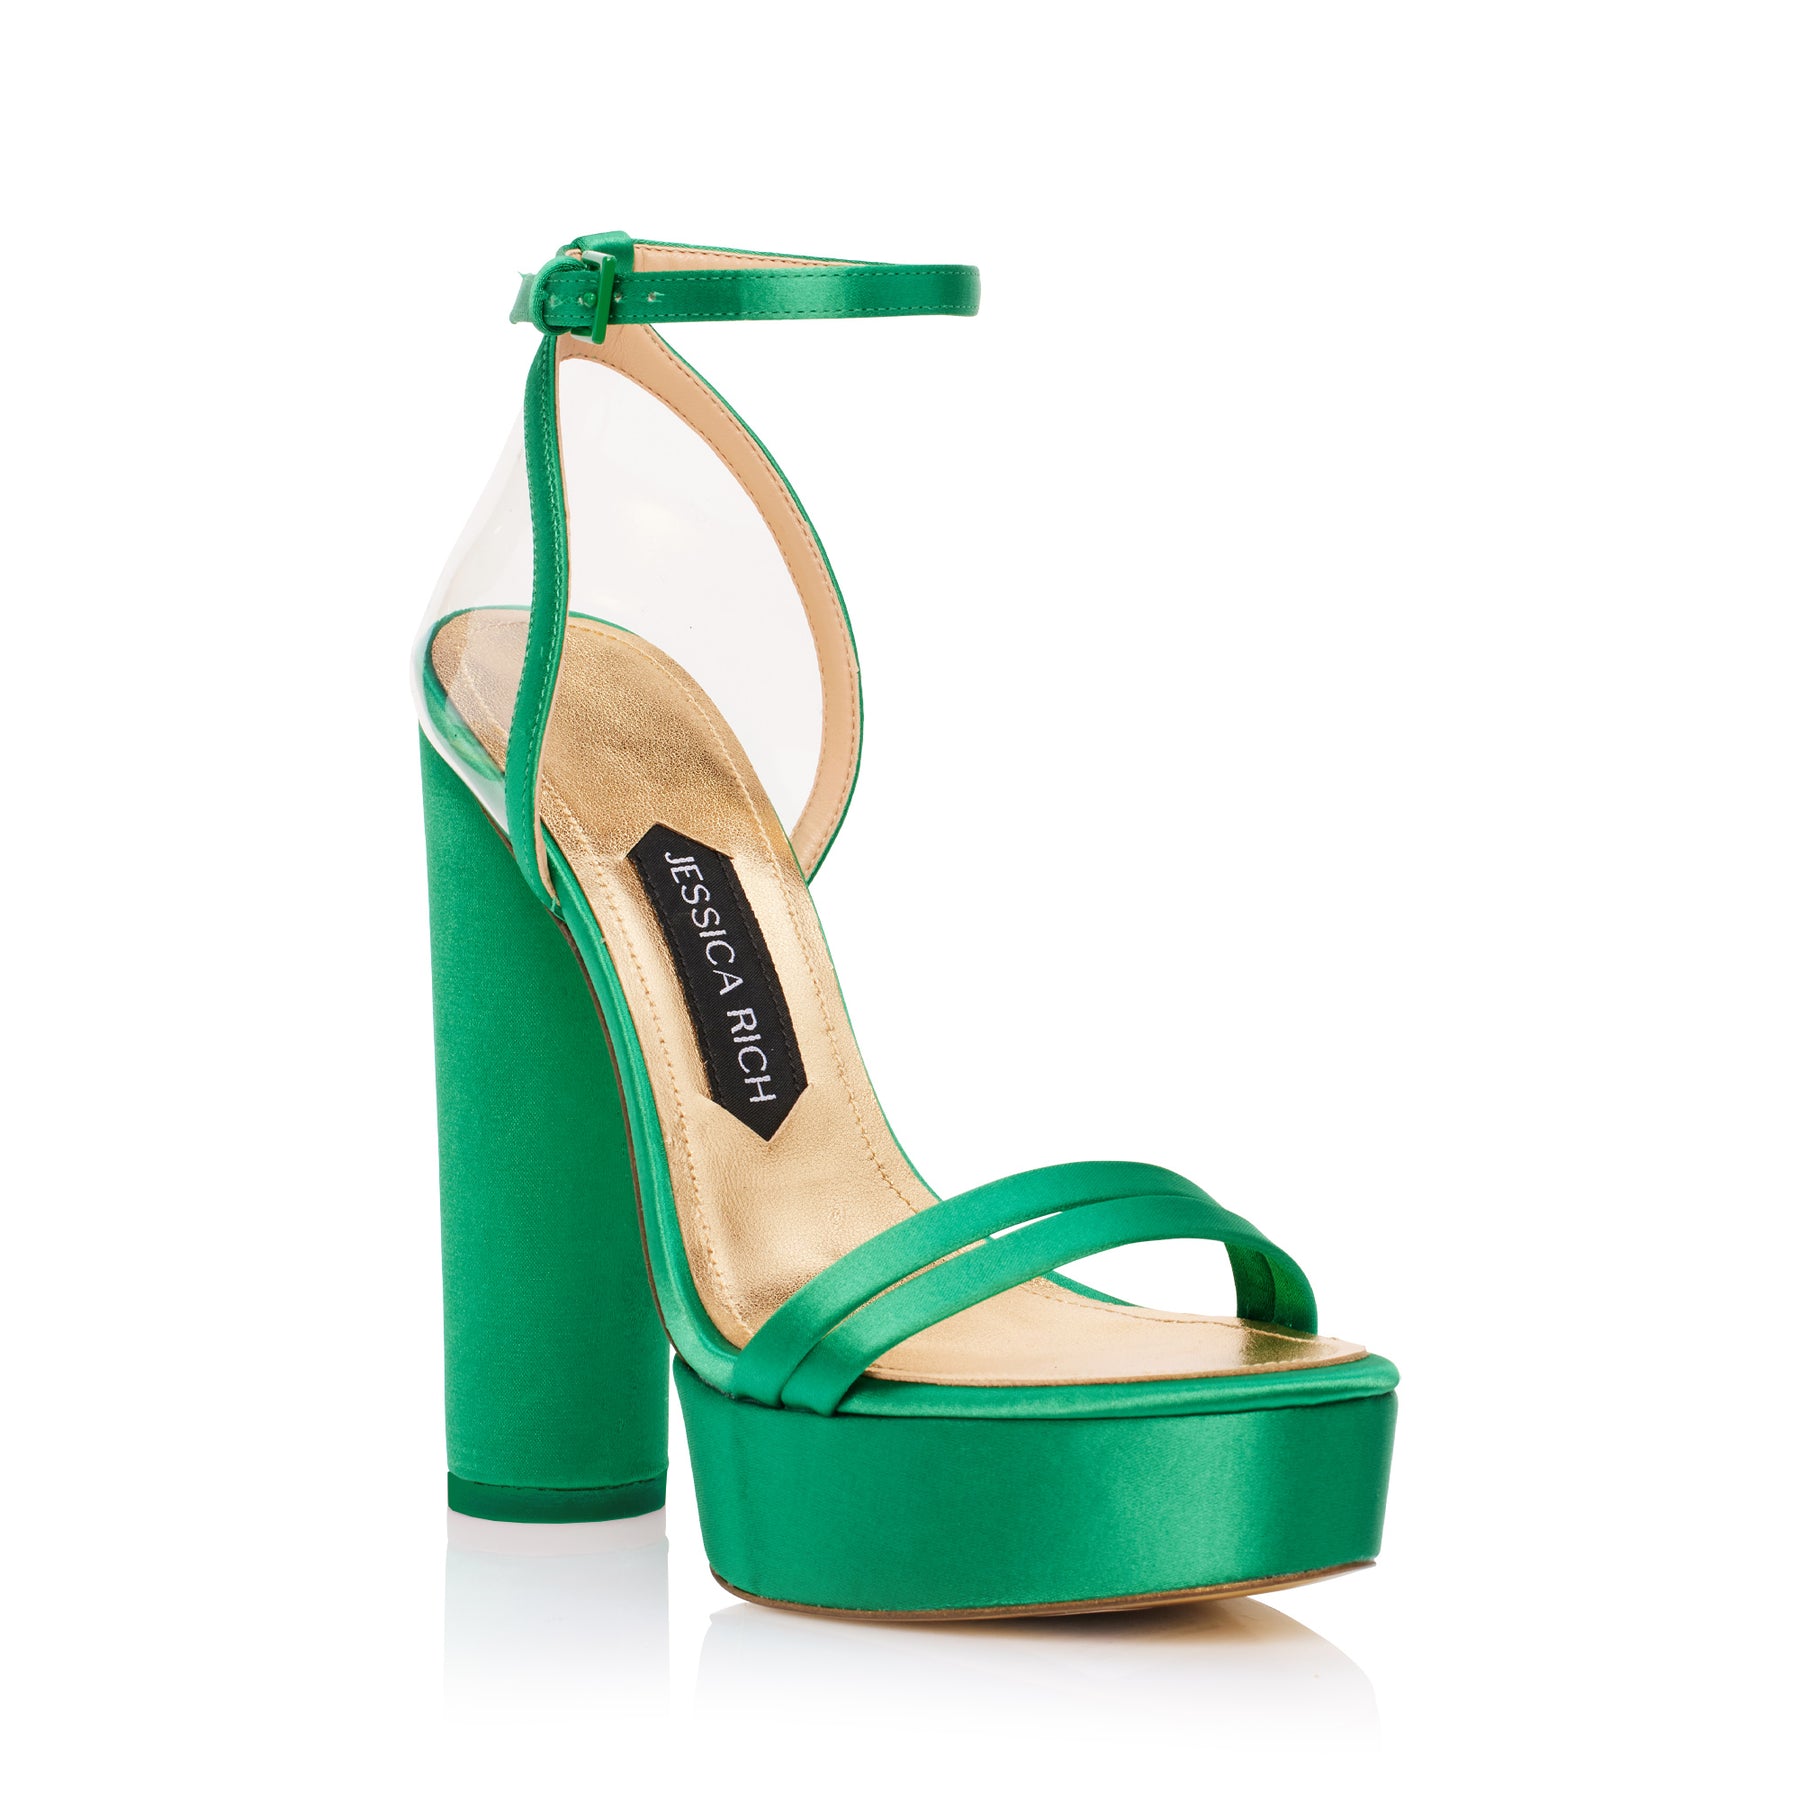 View of the Platform Sandal luxury high heels from Jessica Rich in green from an angle where you can see the inside of the sandal.